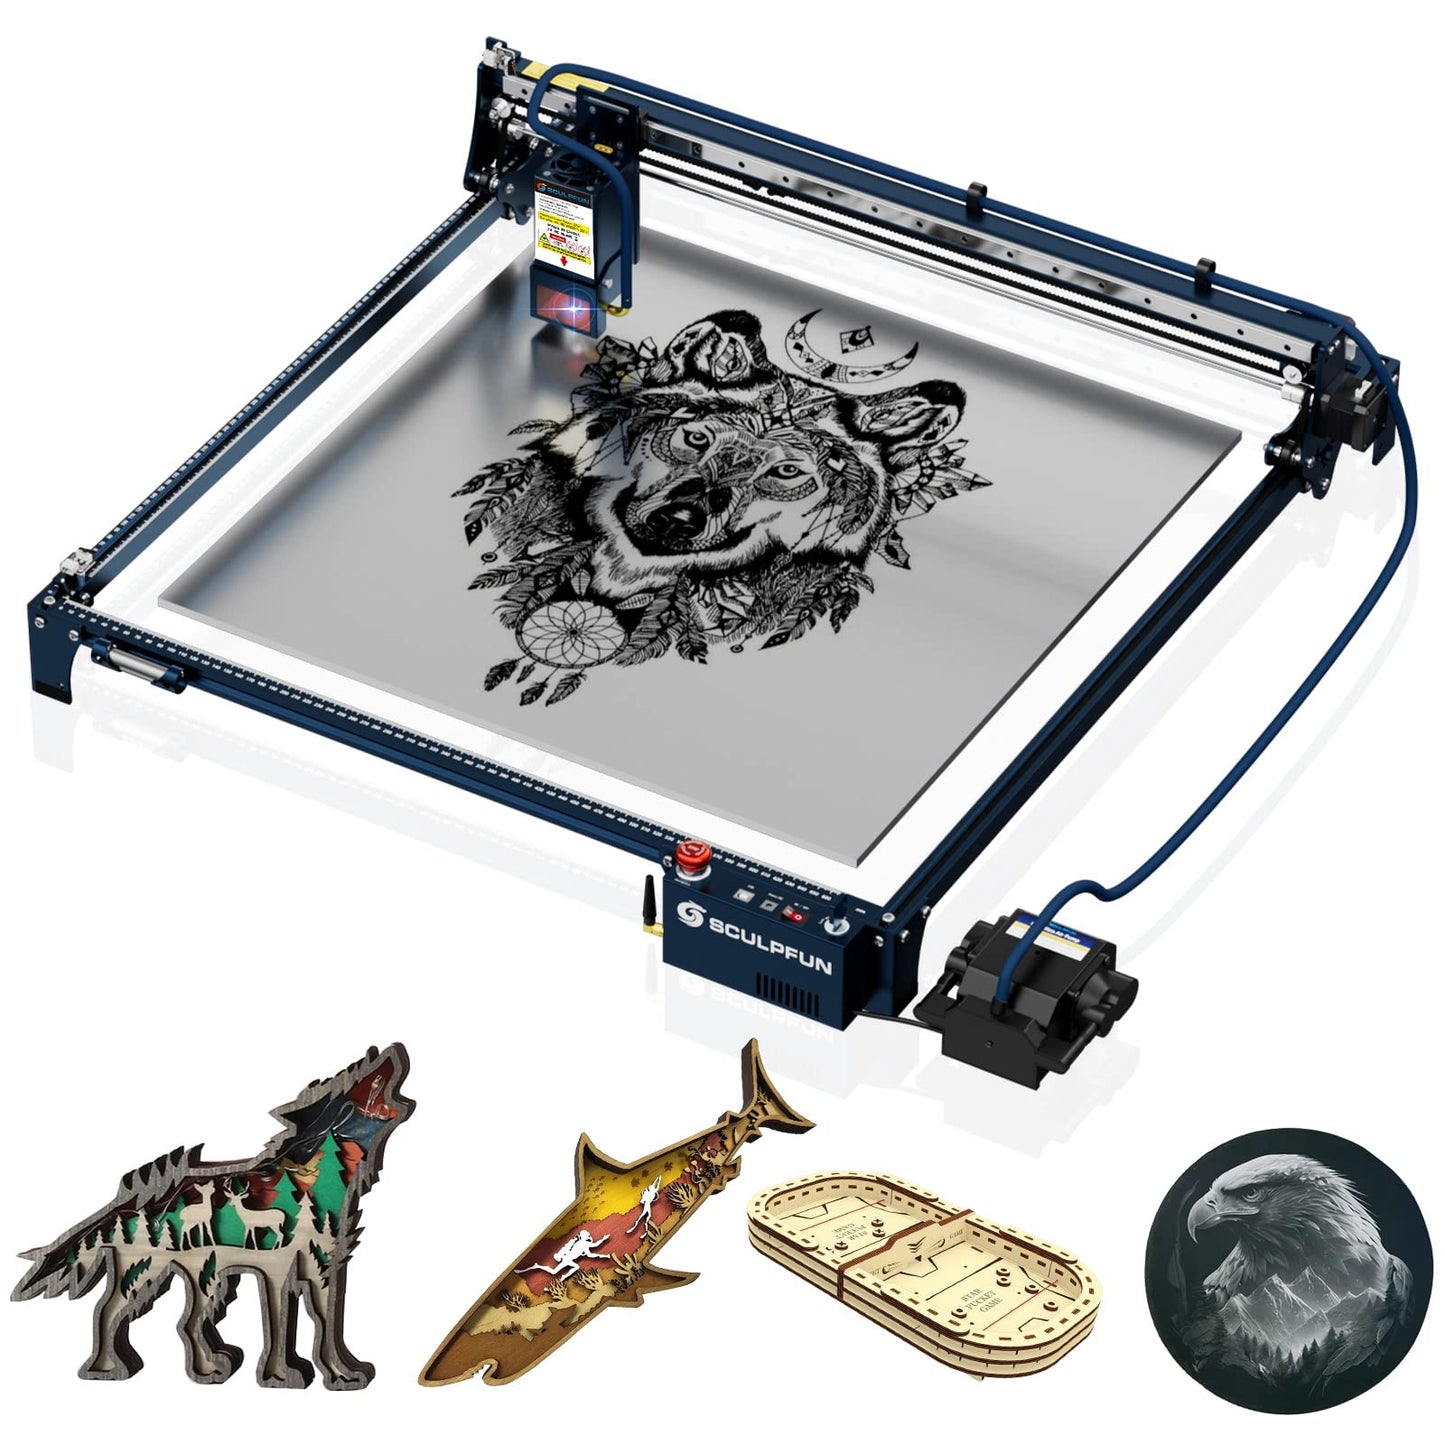 SCULPFUN S30 Ultra 22W Laser Engraver, 0.005mm High Cutting Precision, Replaceable Lens Includes Laser Repair Kit, Laser Engraving Machine for Wood,